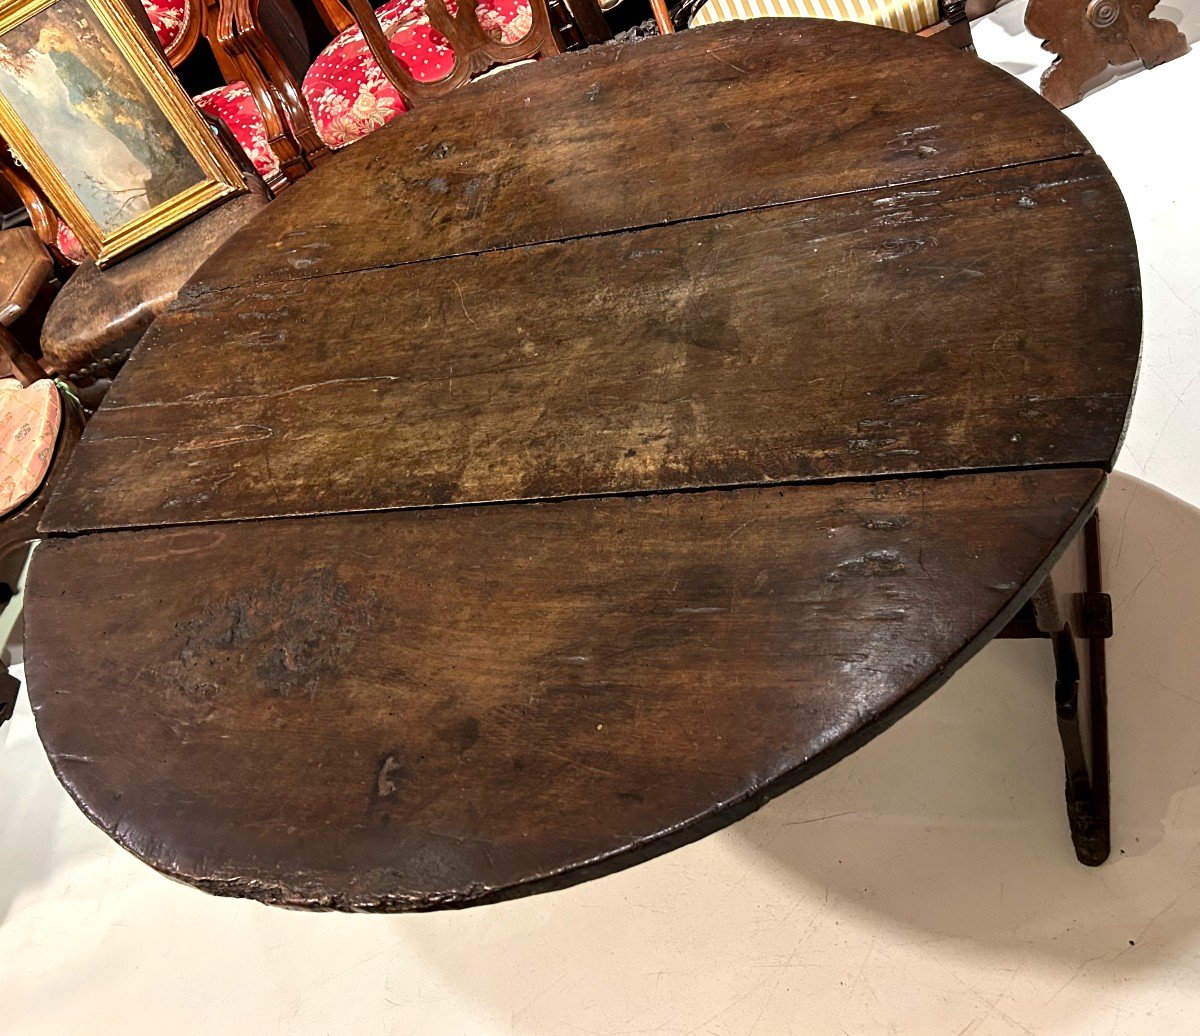 Antique Umbrian Walnut Wood Table From The 16th Century-photo-3